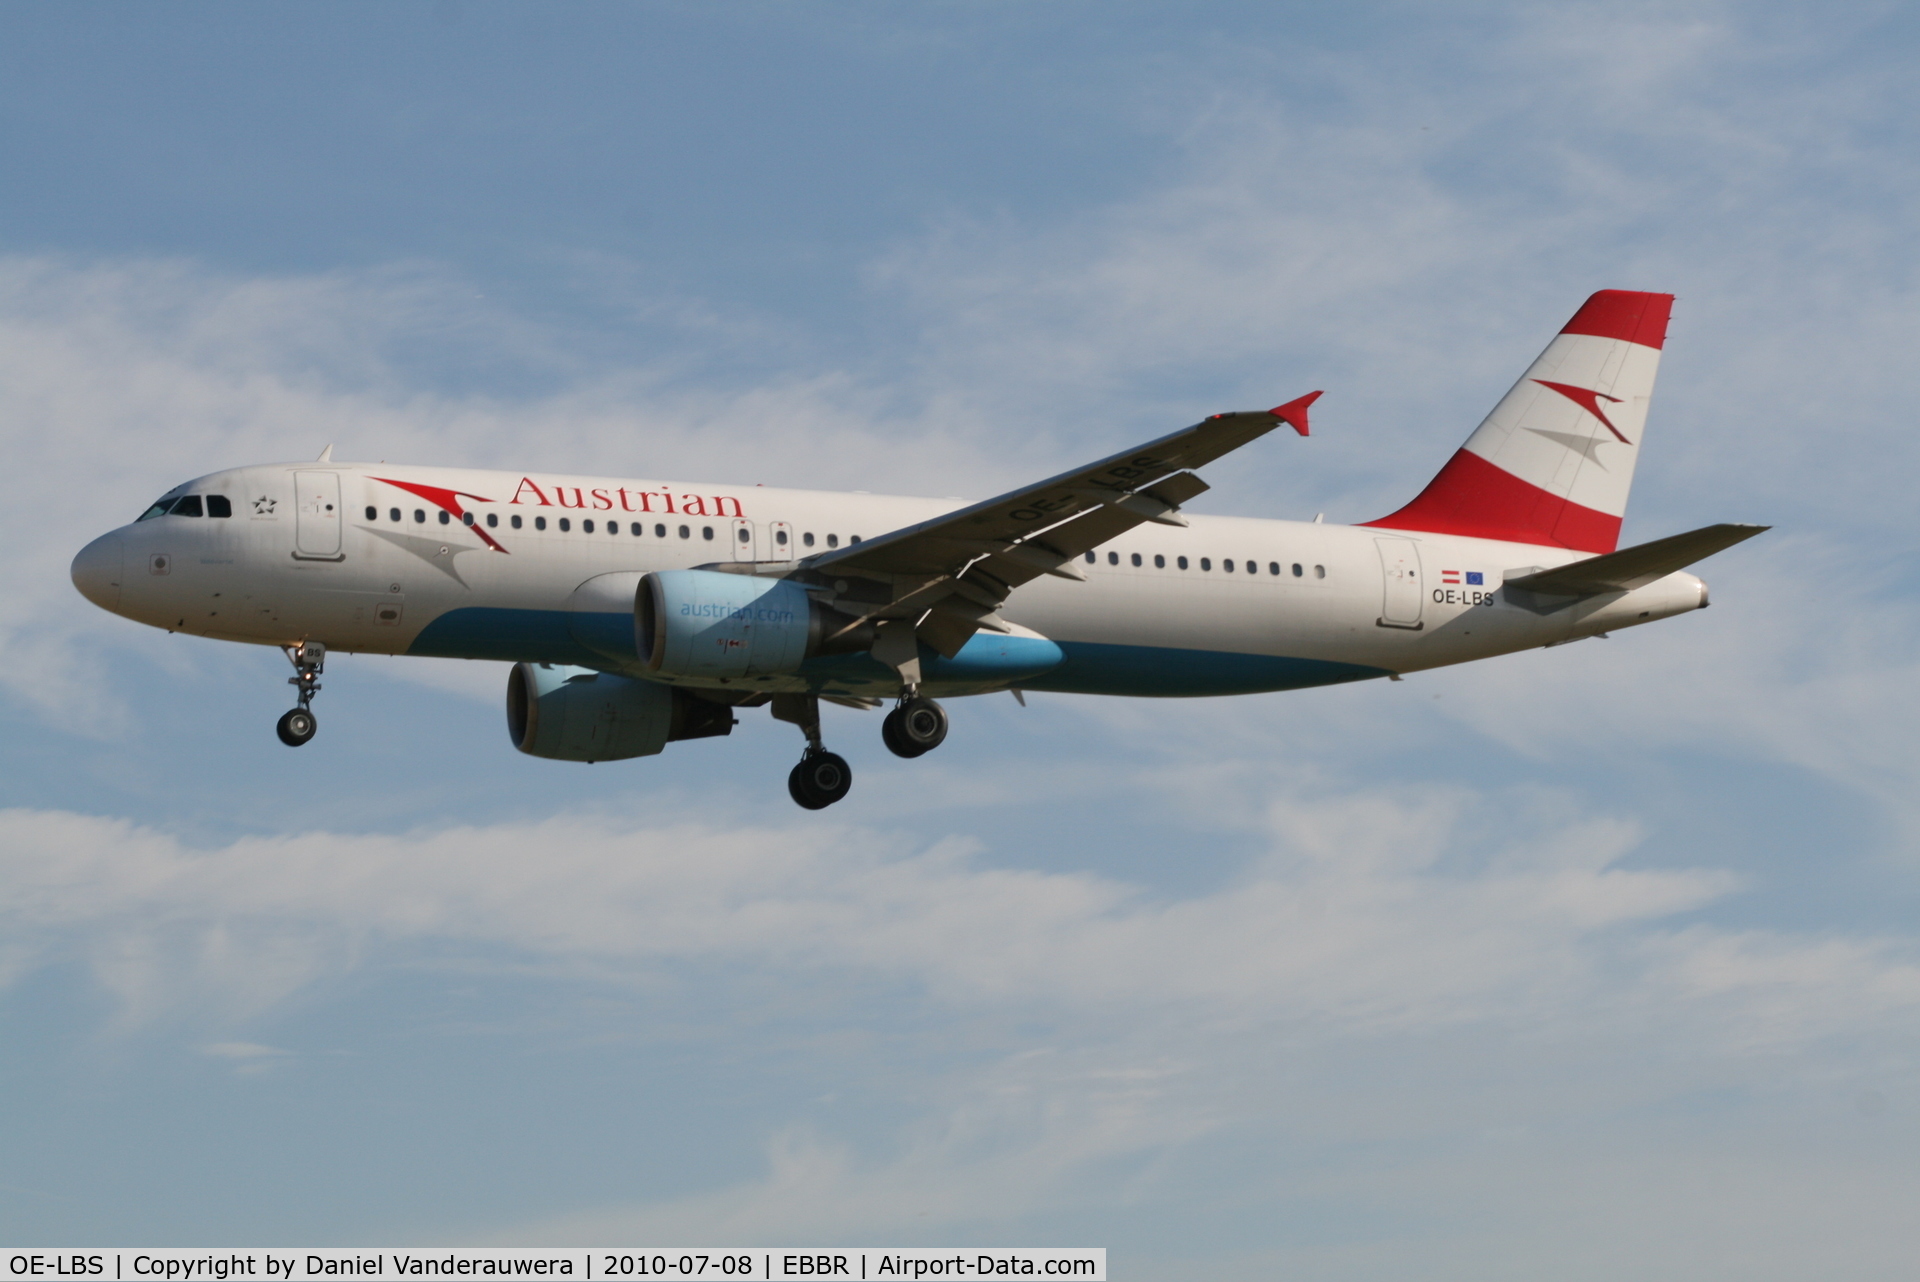 OE-LBS, 2000 Airbus A320-214 C/N 1189, Arrival of flight OS351 to RWY 25L